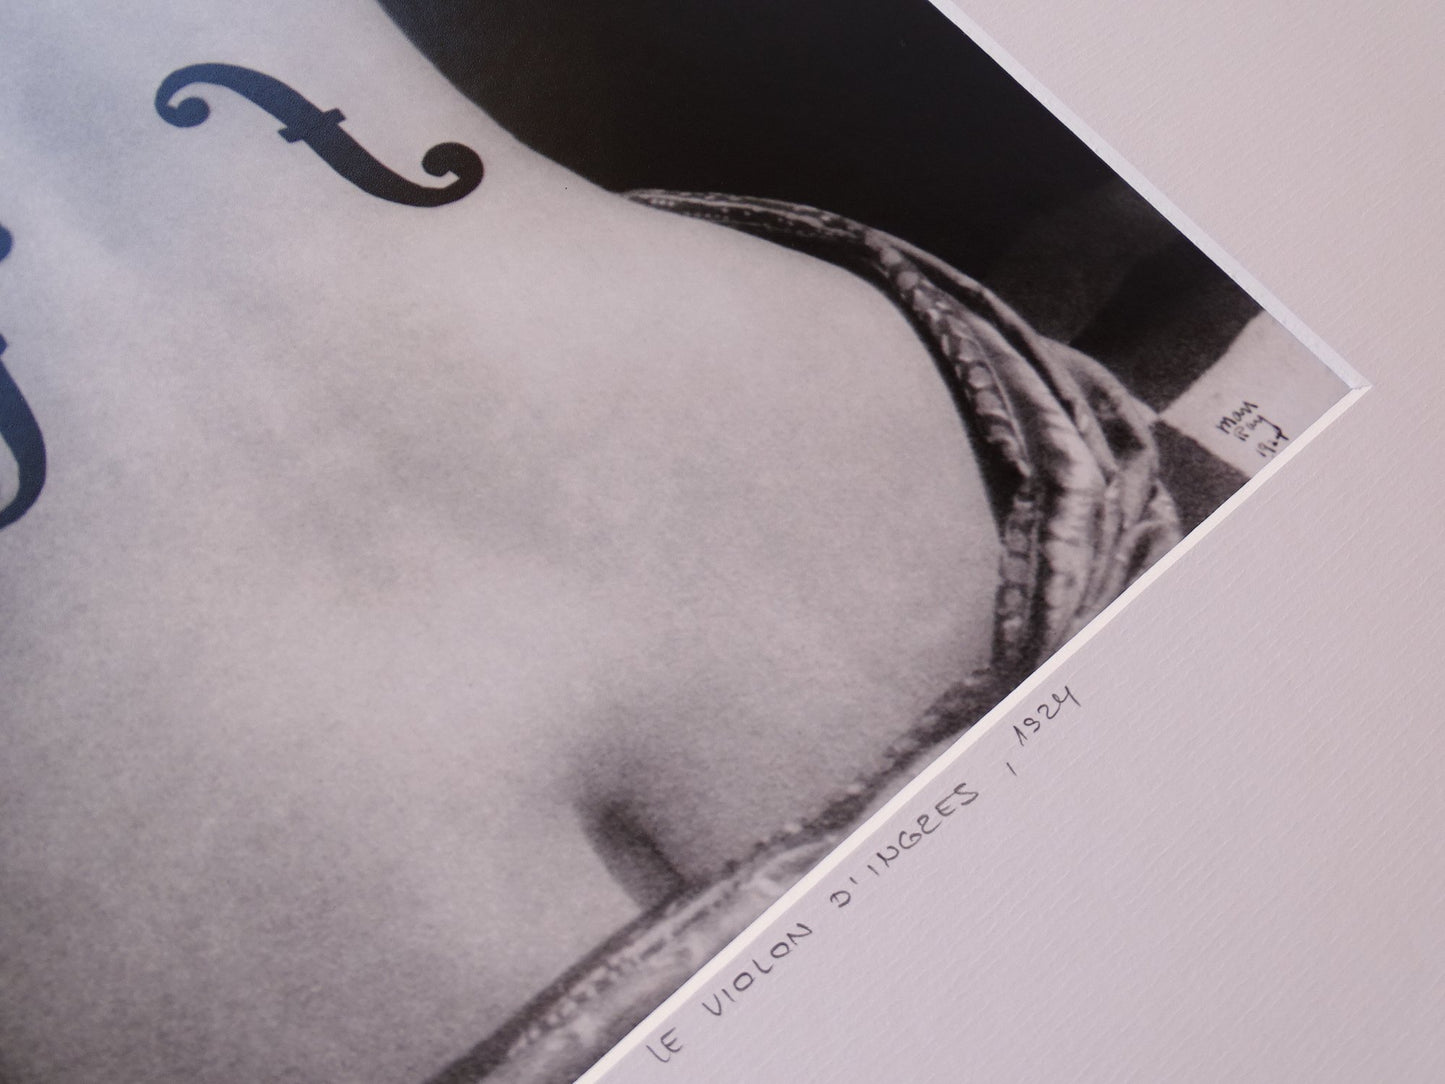 Man Ray Violin d'Ingres, 1924 - Out of print edition